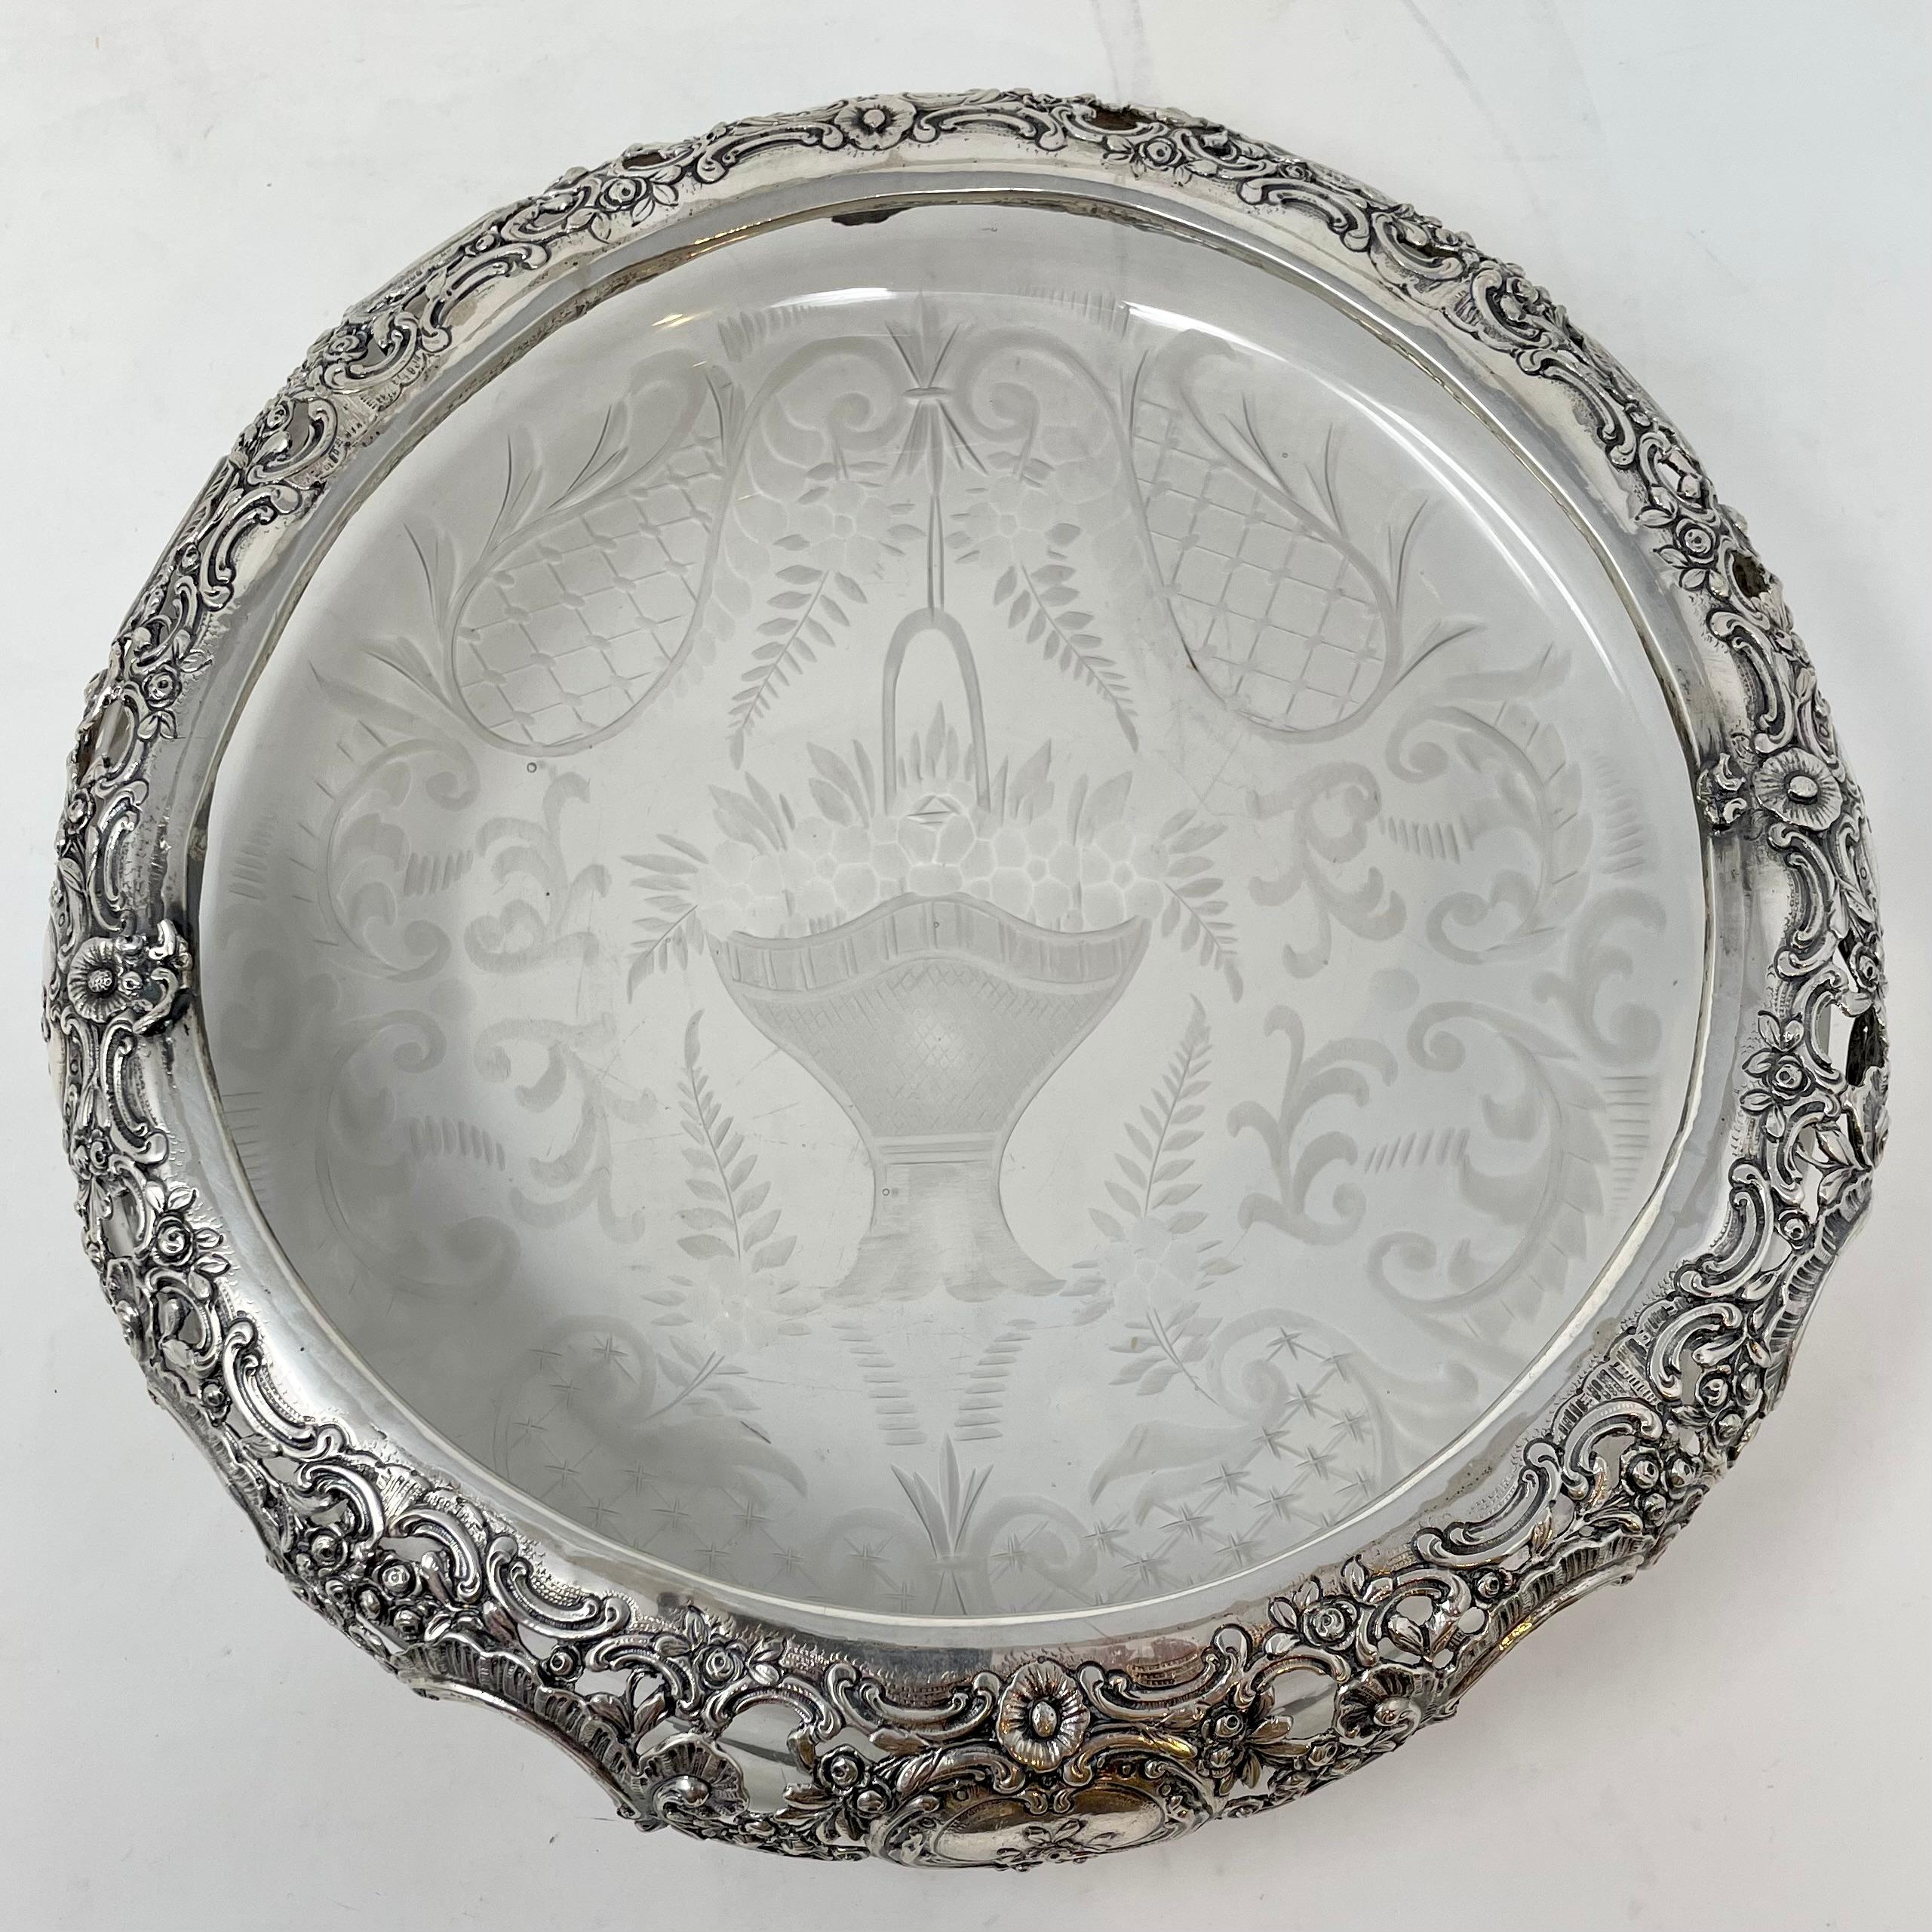 Antique Cut Crystal Bowl with Continental Sterling Silver Mount Circa 1880-1890 In Good Condition For Sale In New Orleans, LA